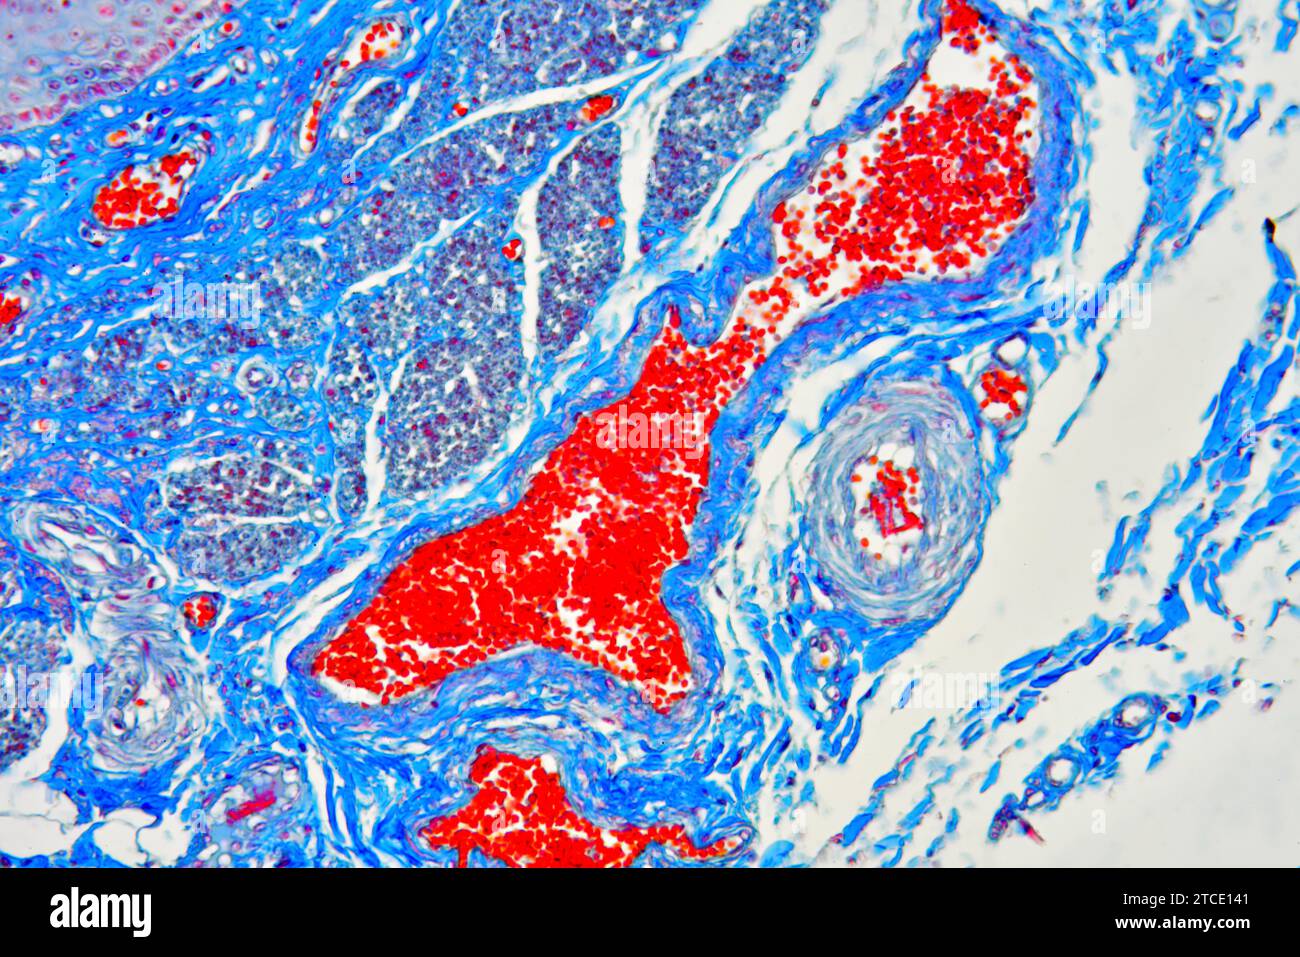 Human esophagus or oesophagus showing vessels, blood and connective tissue. Optical microscope X200. Stock Photo